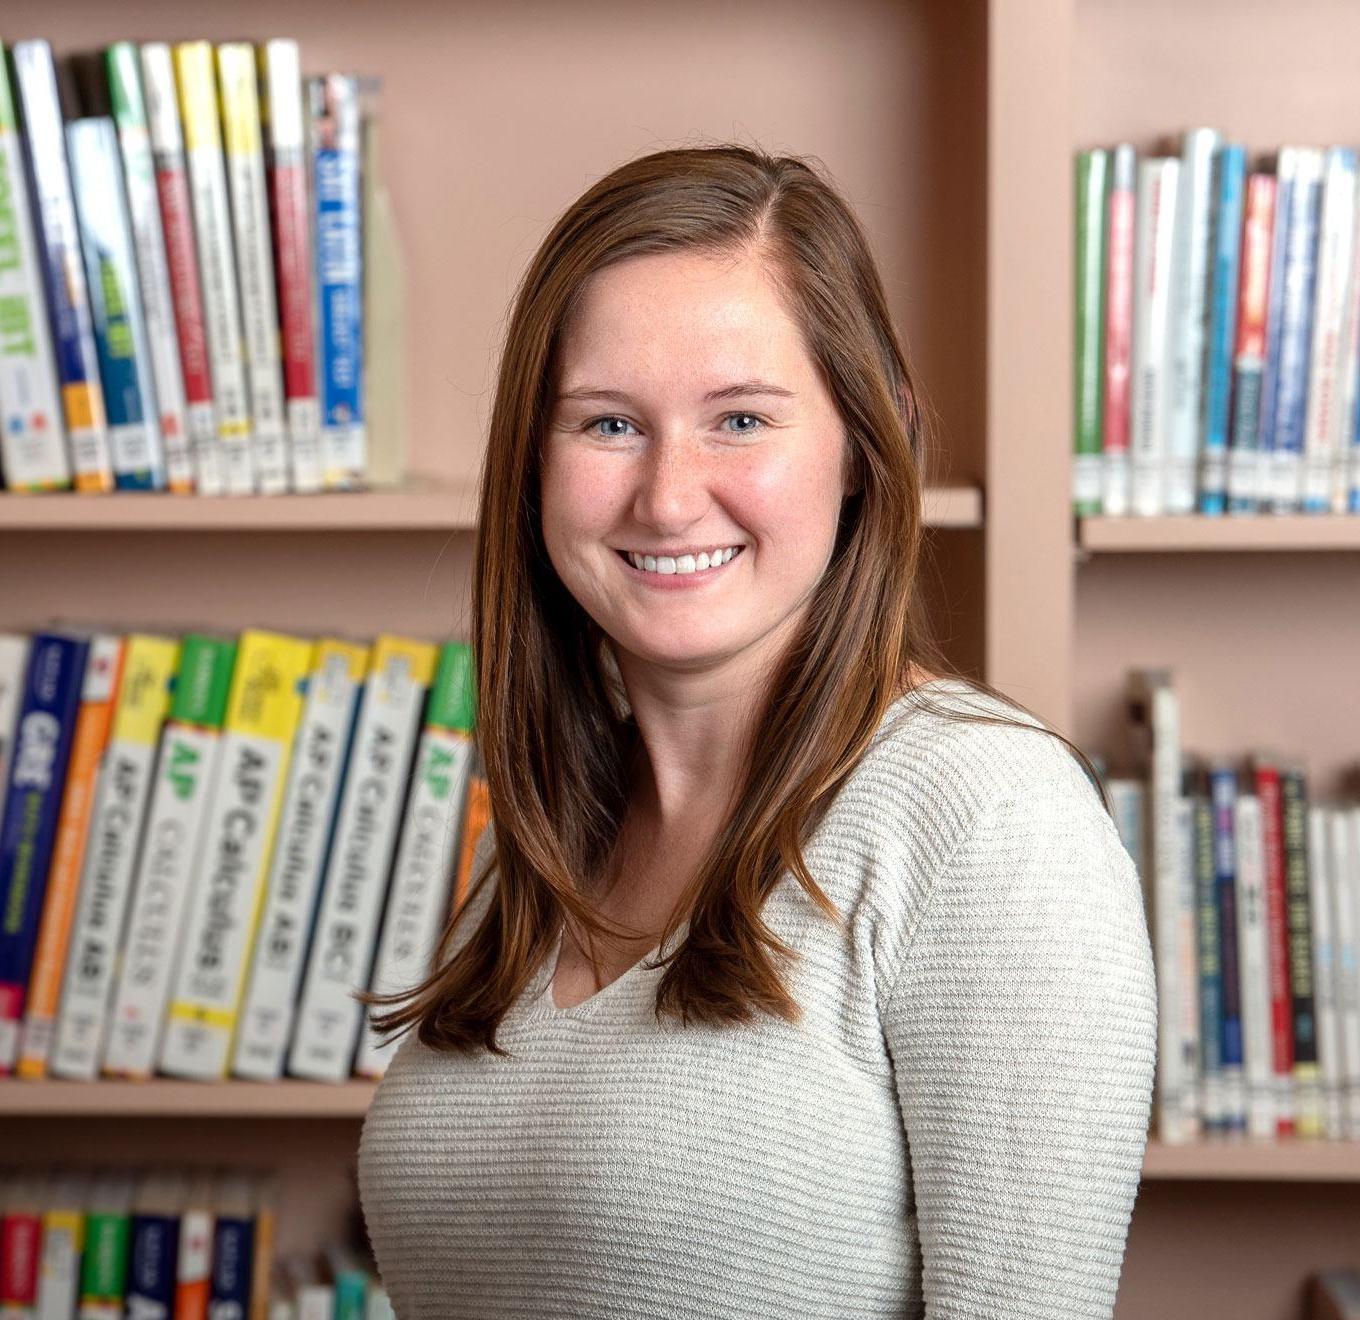 A headshot of Megan in her school library. She has long hair and is wearing a long-sleeved beige shirt.